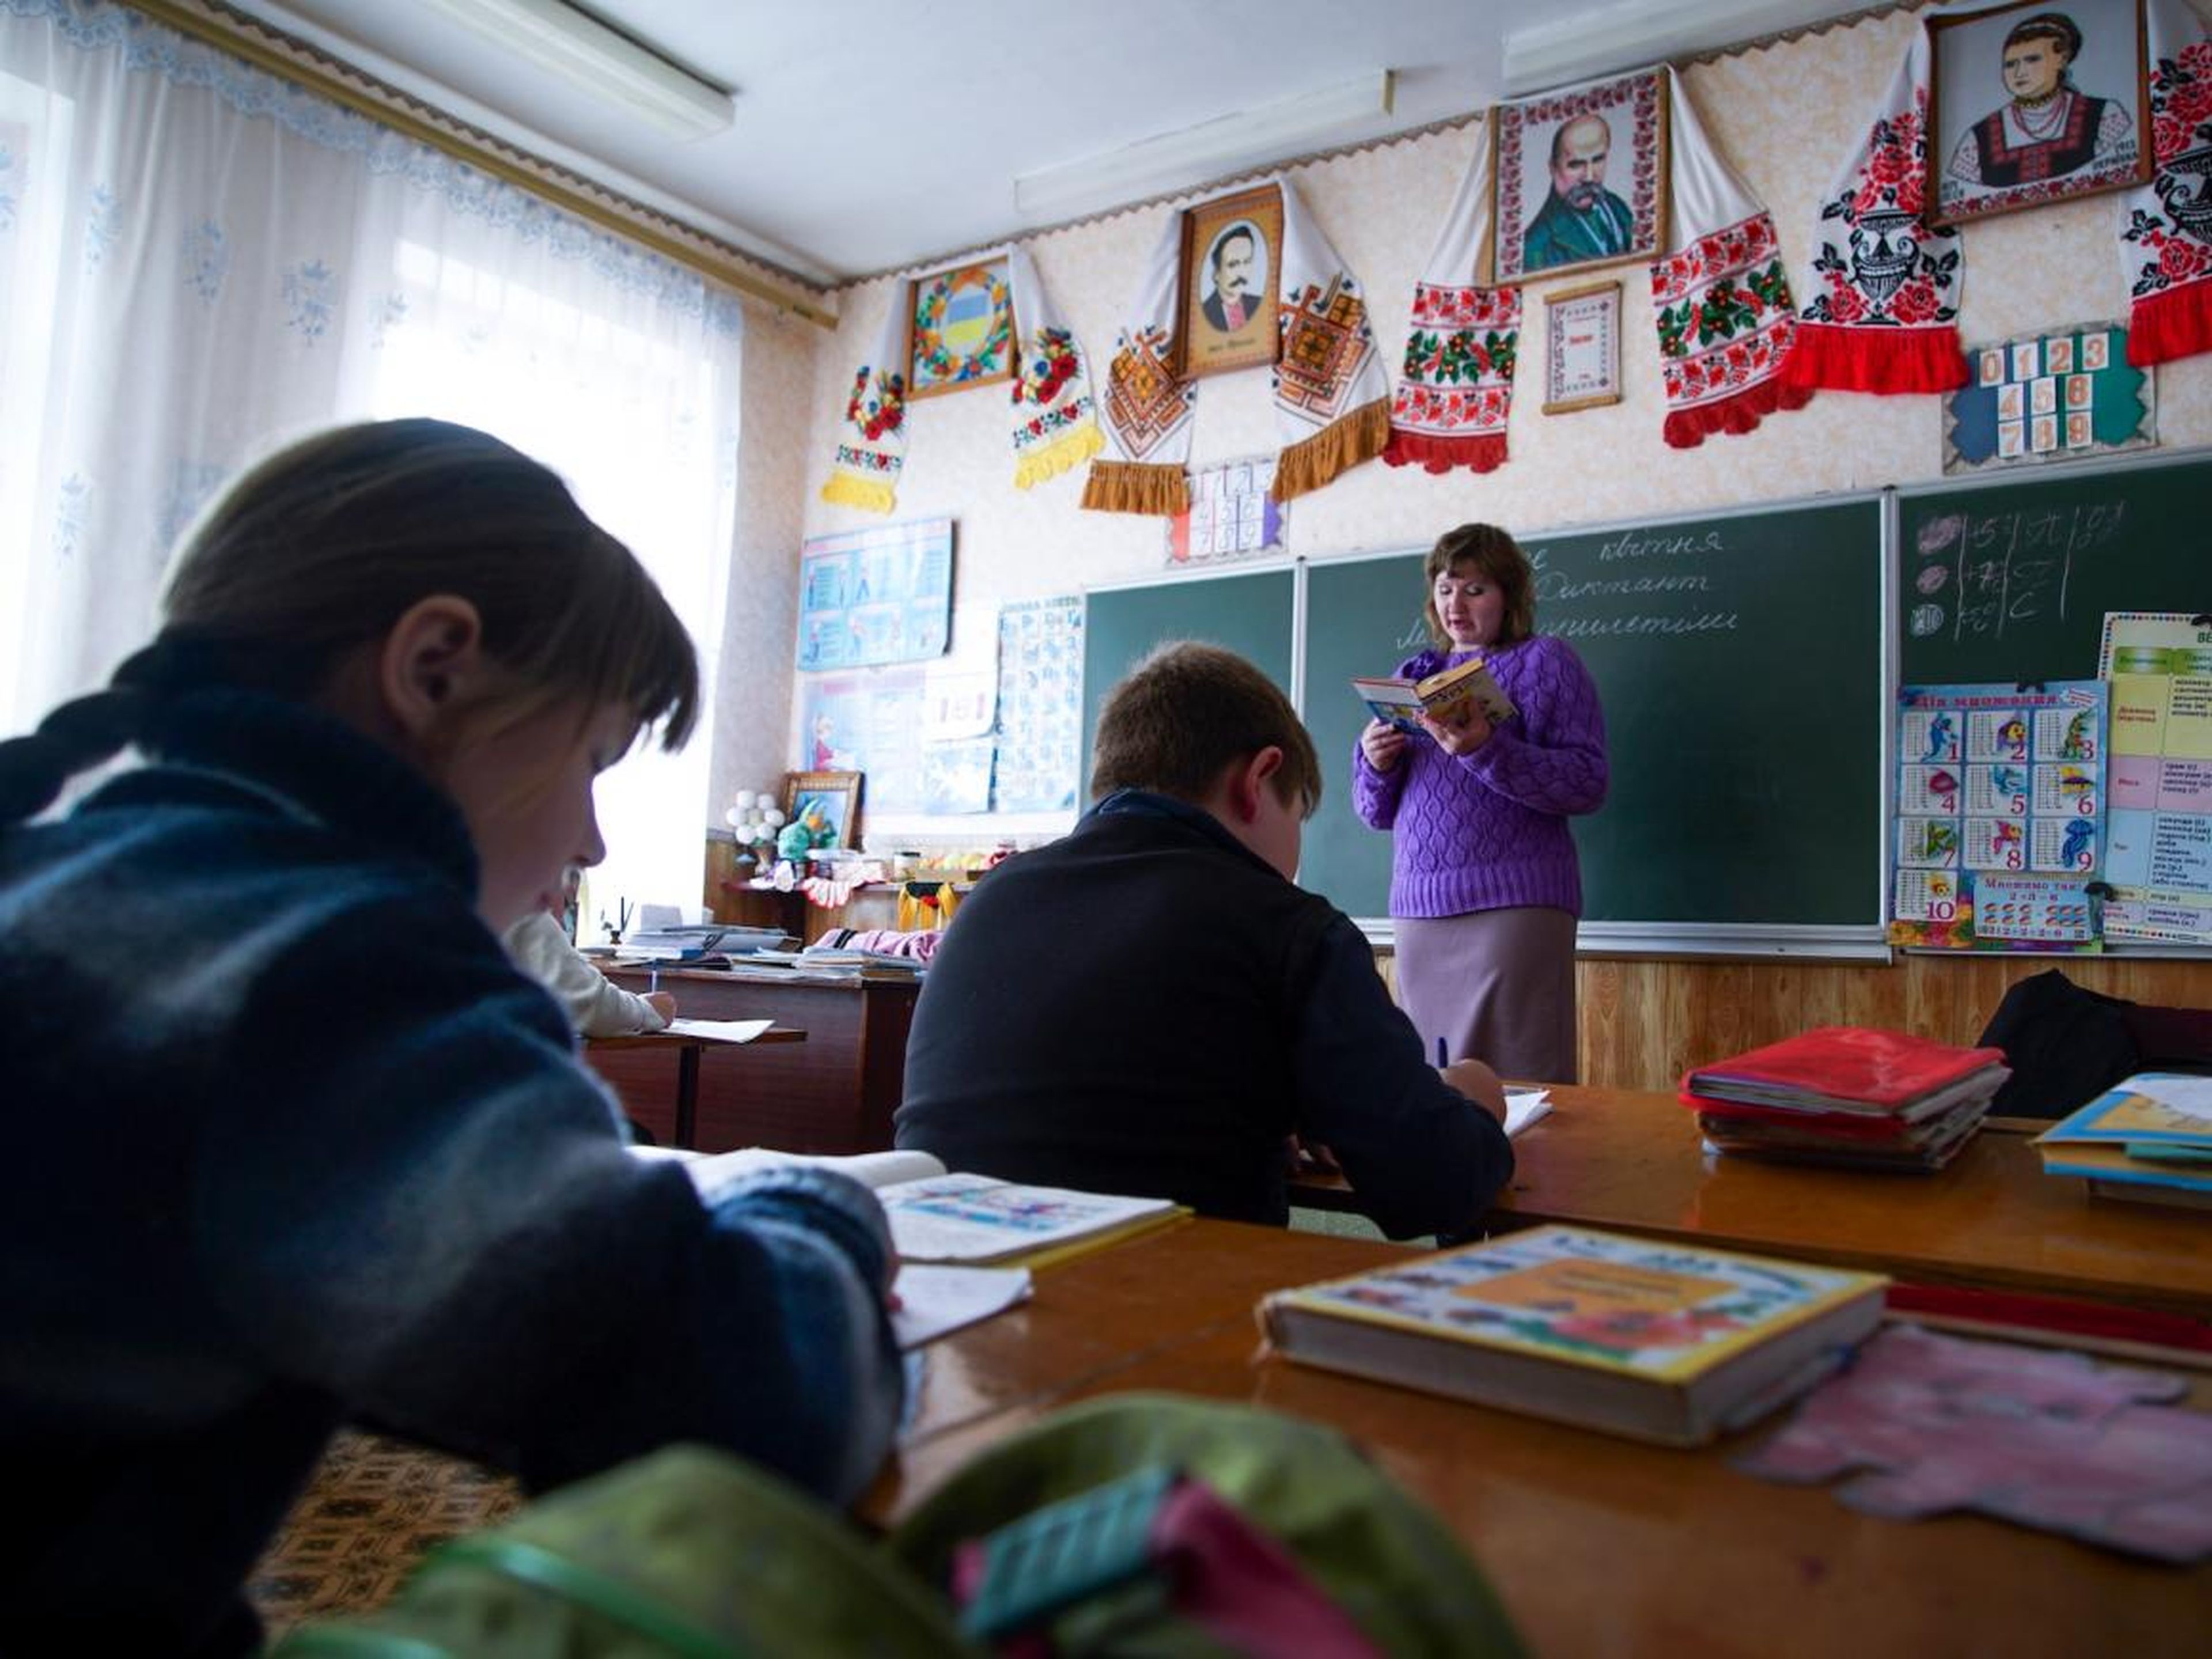 "Hot meals in the schools were the only clean food, which was tested for radiation, for the children," Natalya Stepanchuk, a teacher in Zalyshany, told the AP in 2016. "Now the children have gone over to the local food, over which